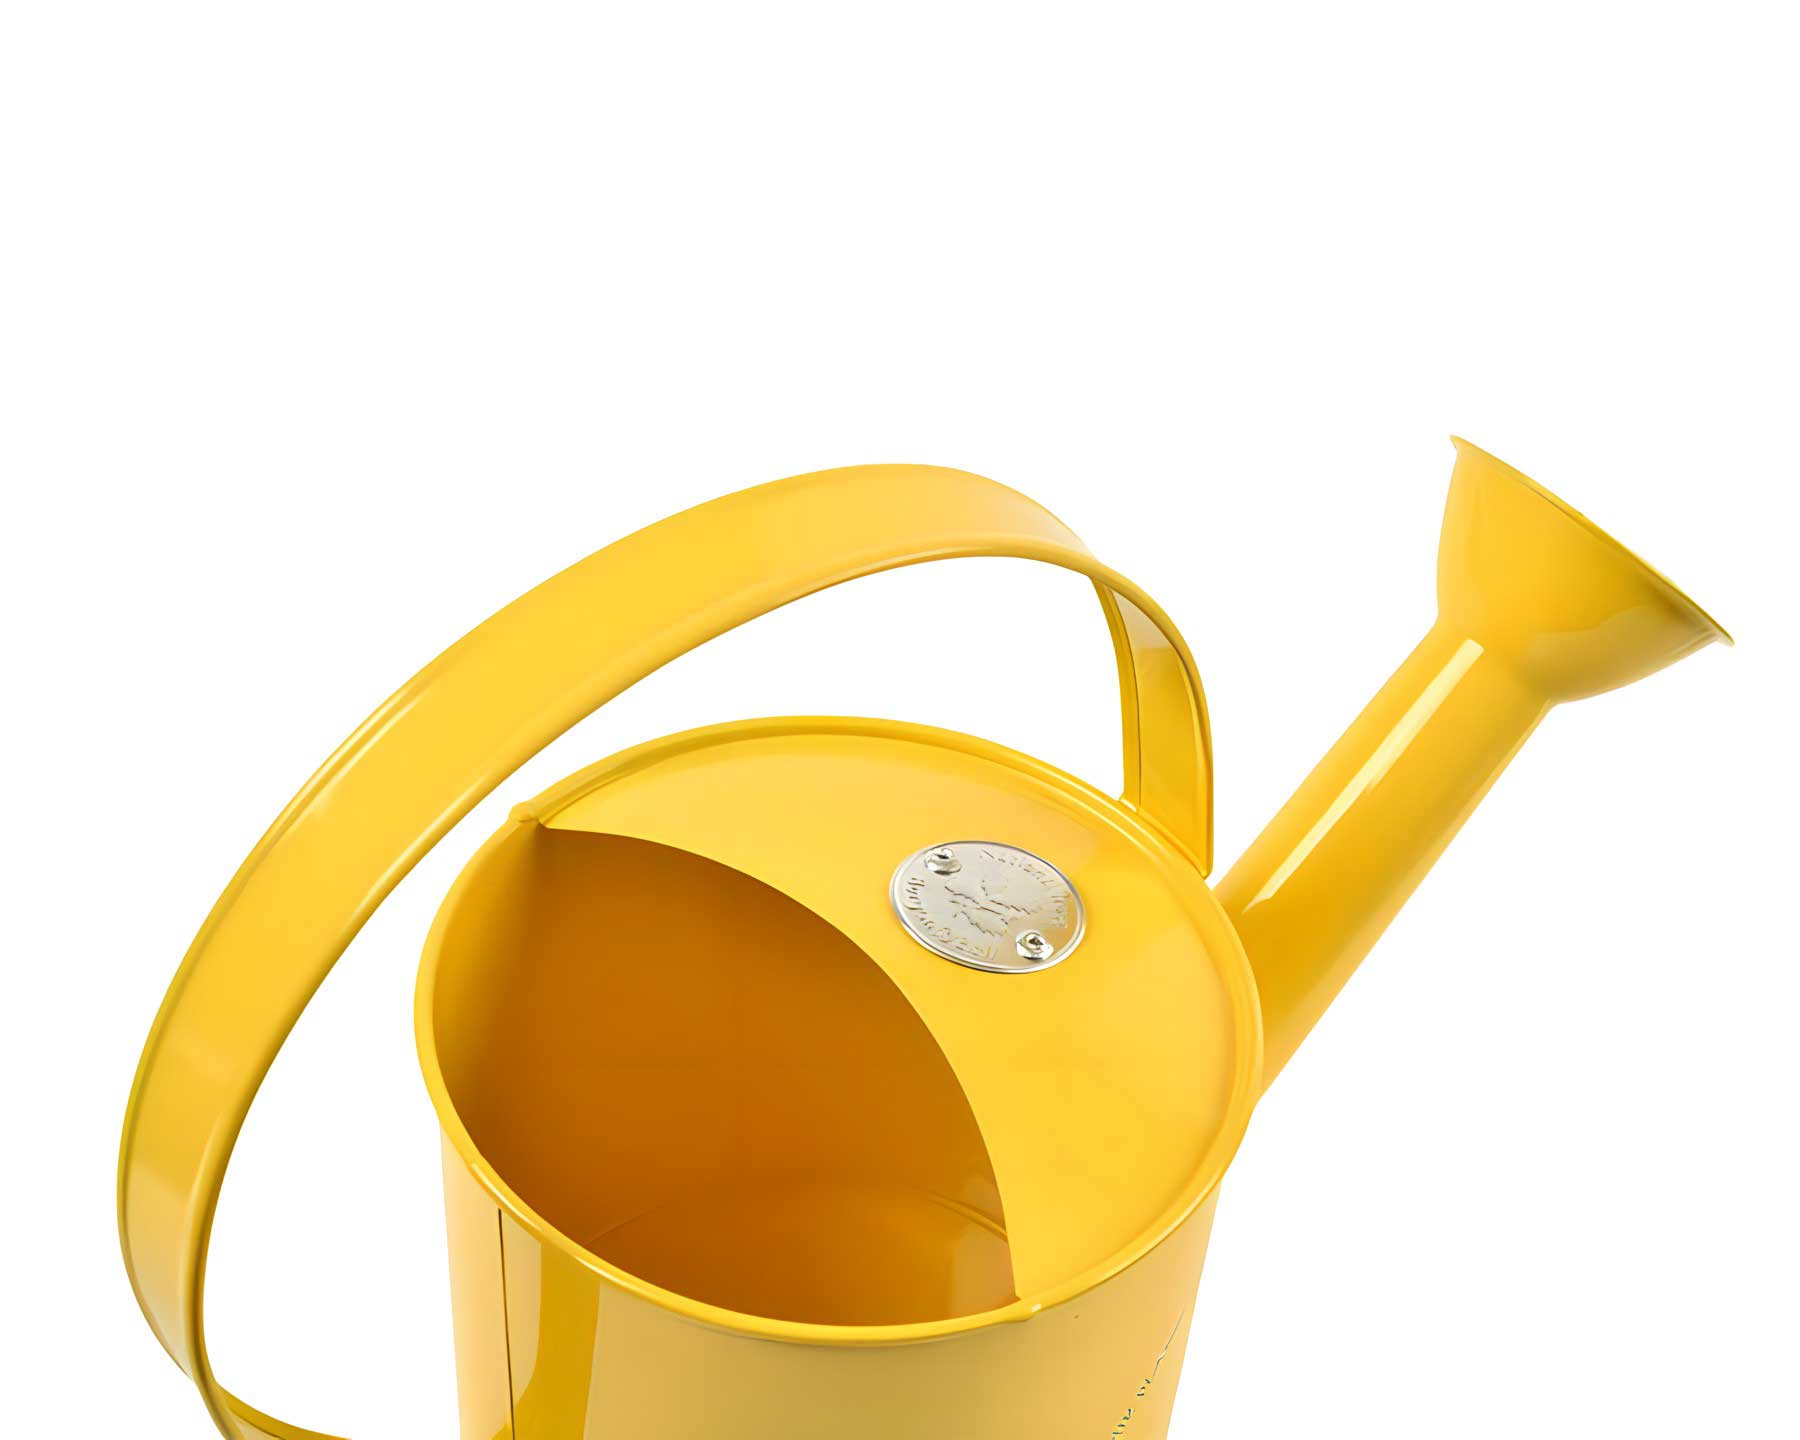 The top of Children's Watering Can - part of the 'Get me Gardening' range by the National Trust